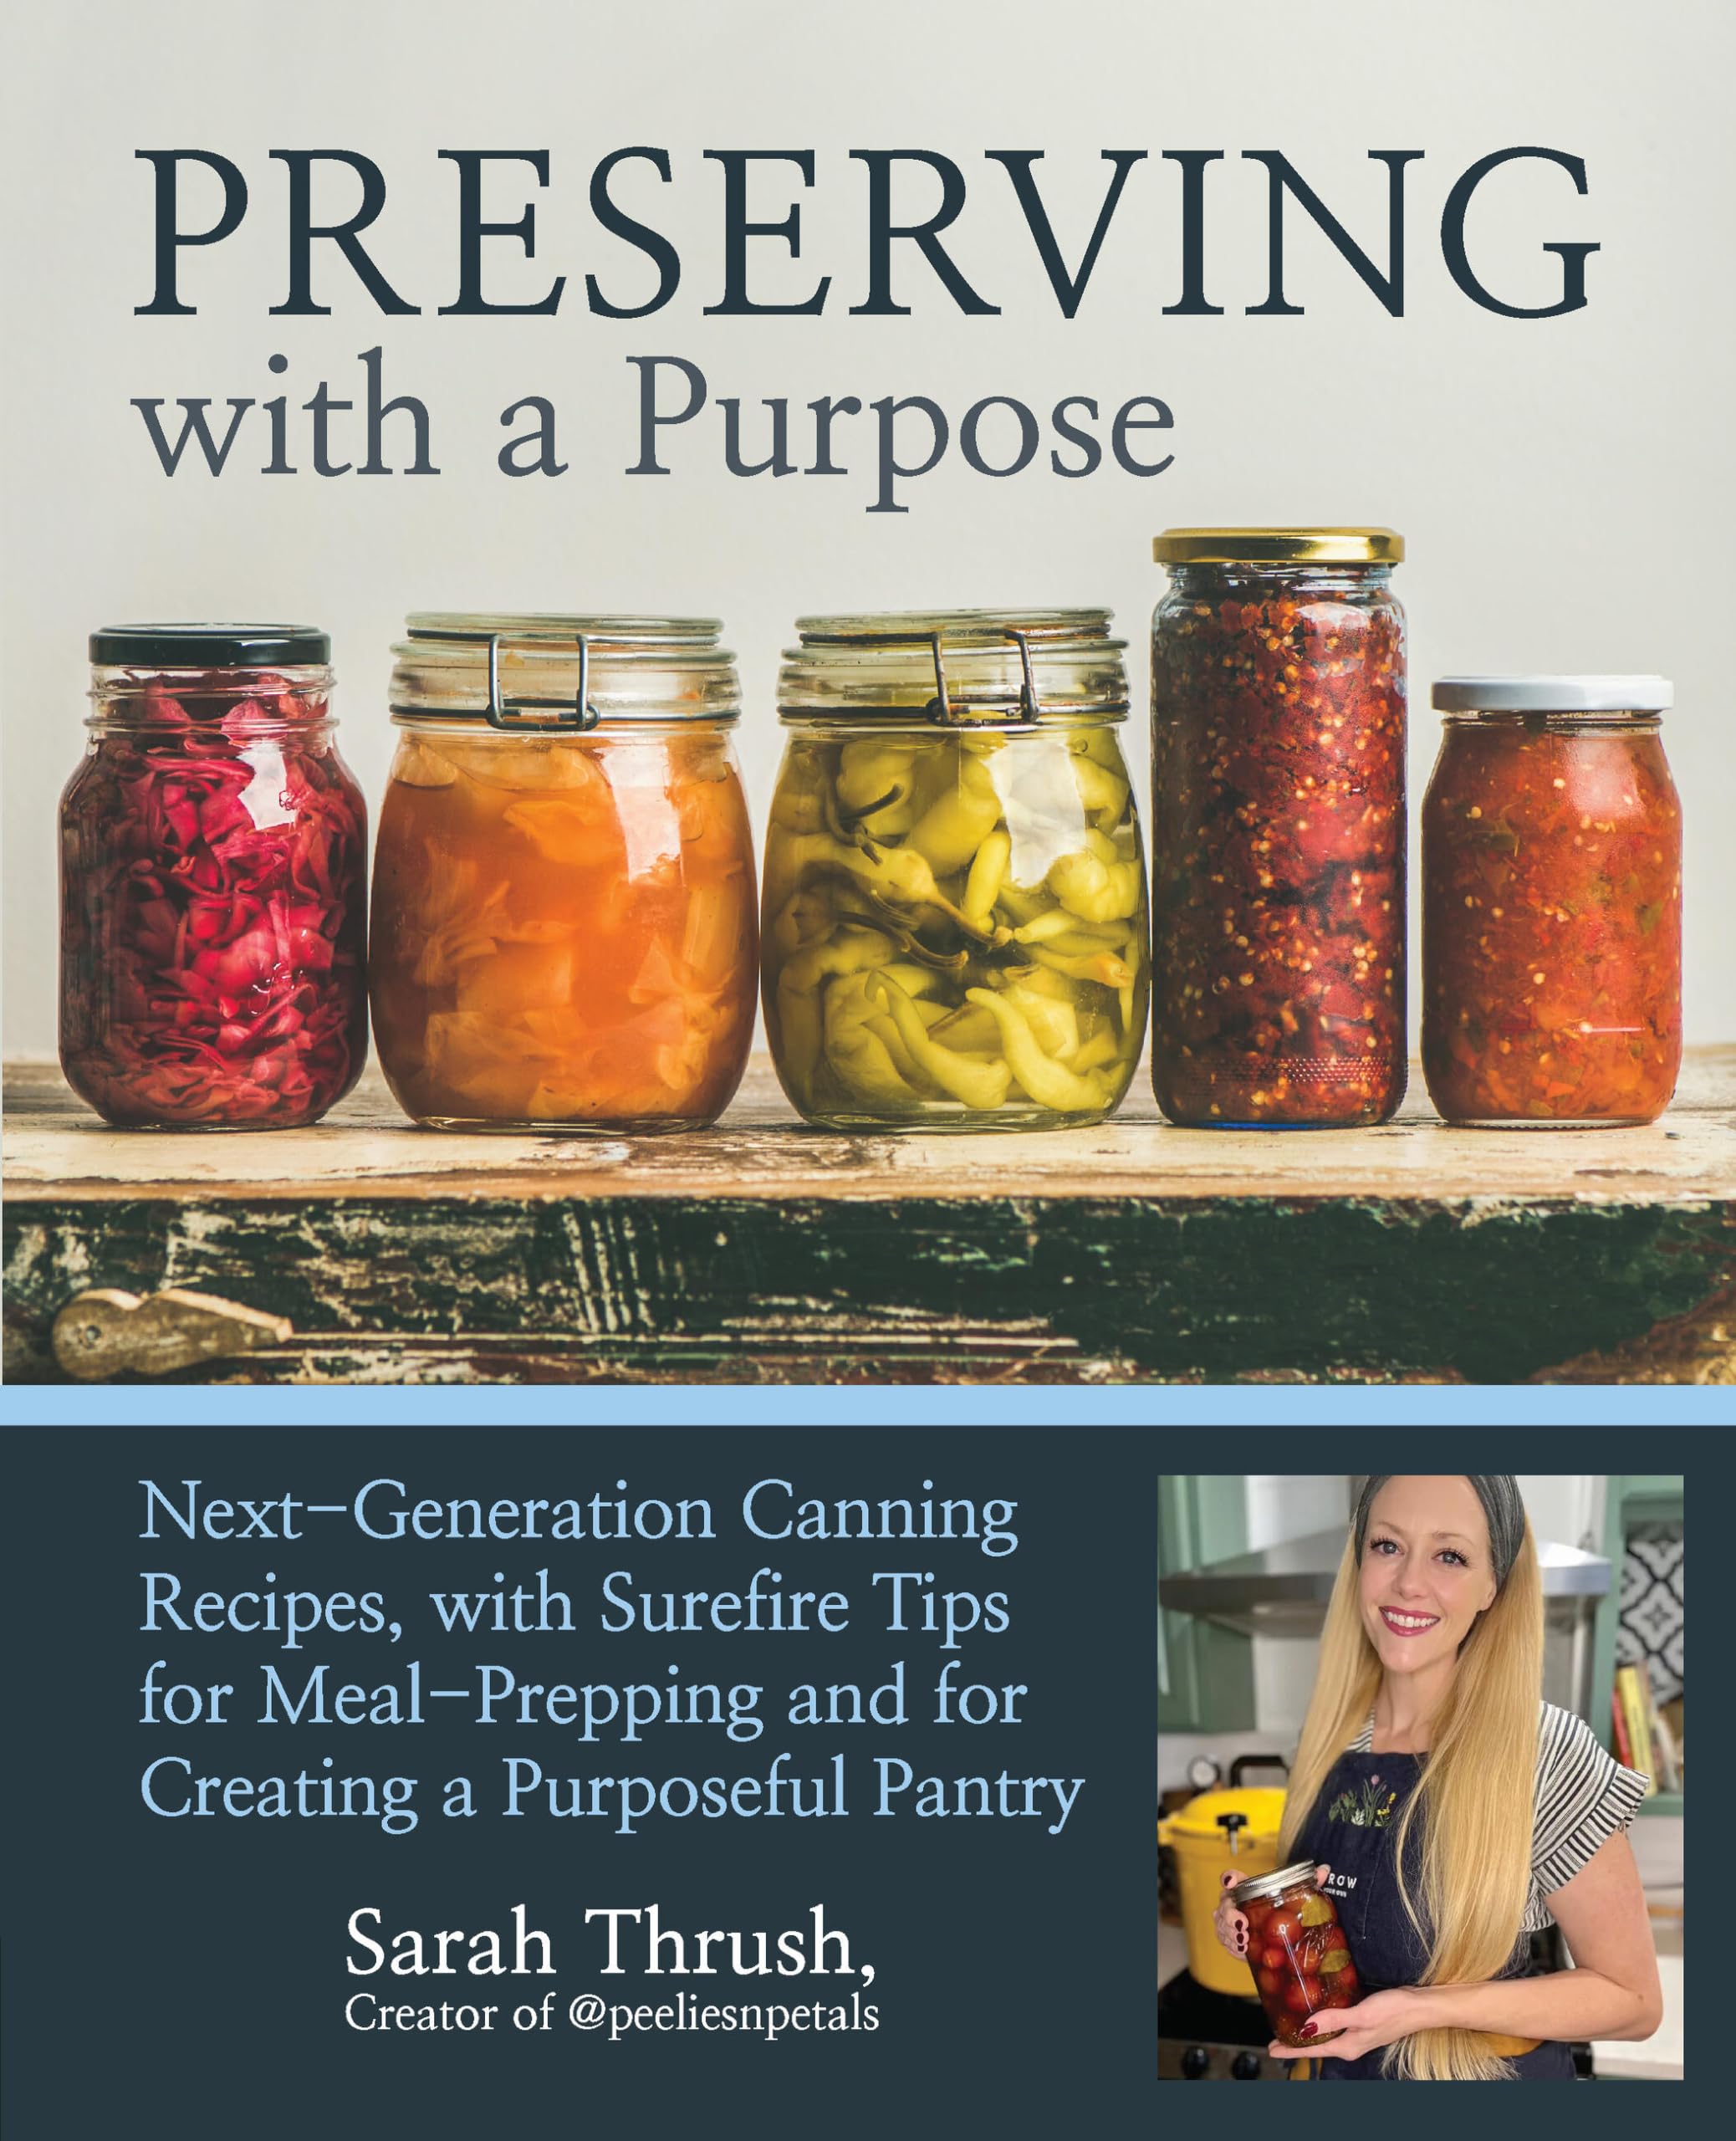 Preserving with a Purpose: Next-Generation Canning Recipes, with Surefire Tips for Meal-Prepping and for Creating a Purposeful Pantry